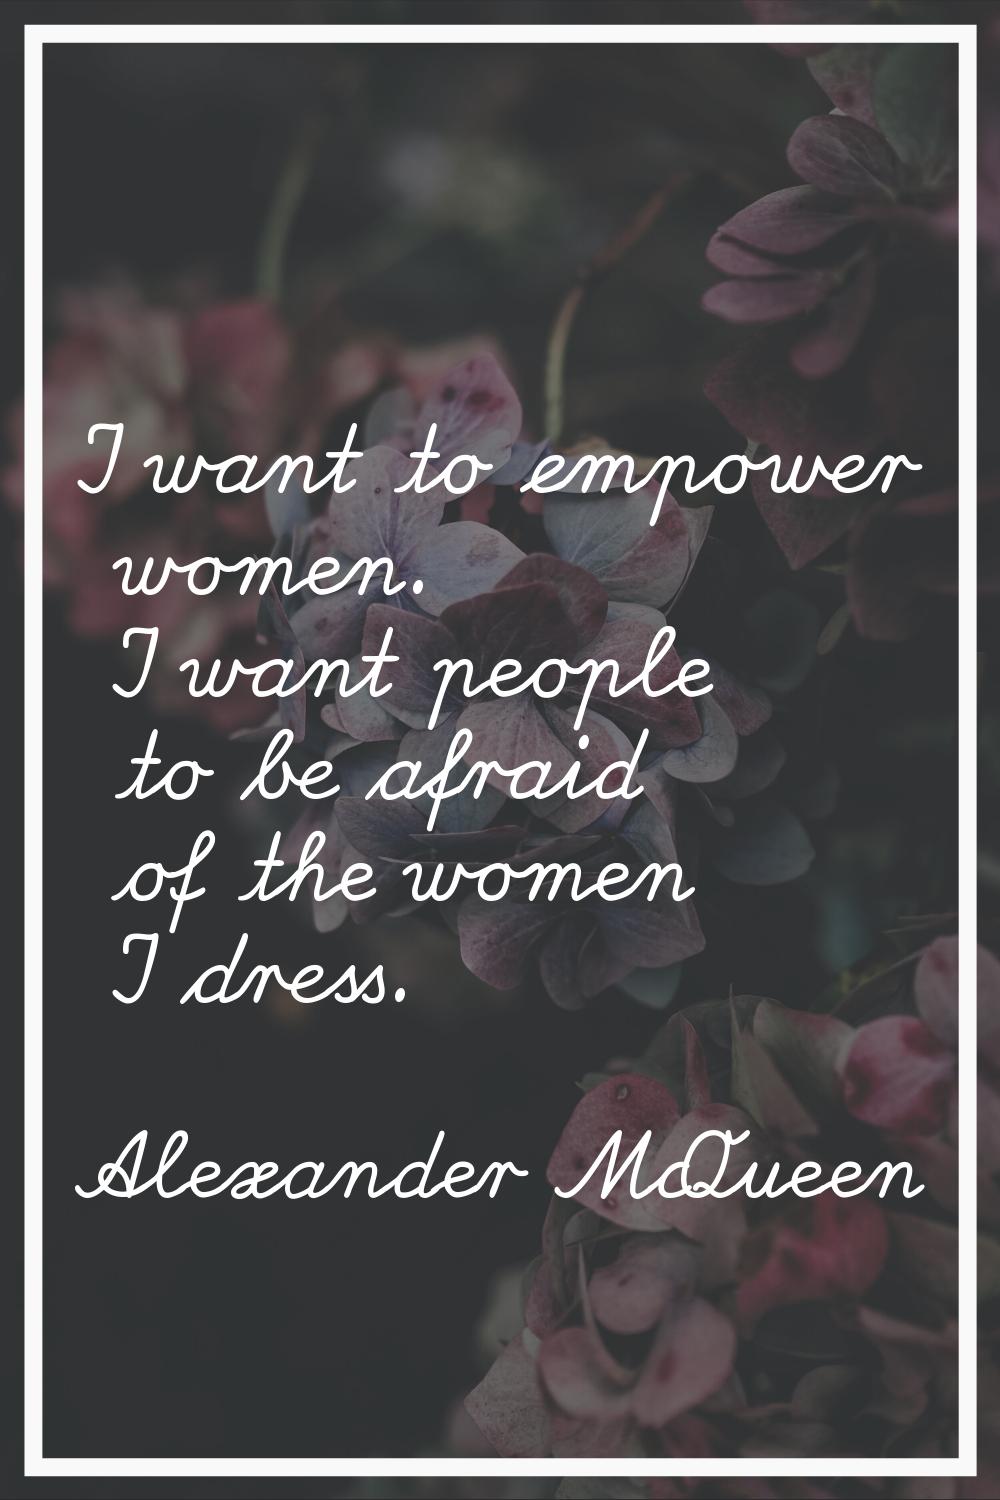 I want to empower women. I want people to be afraid of the women I dress.